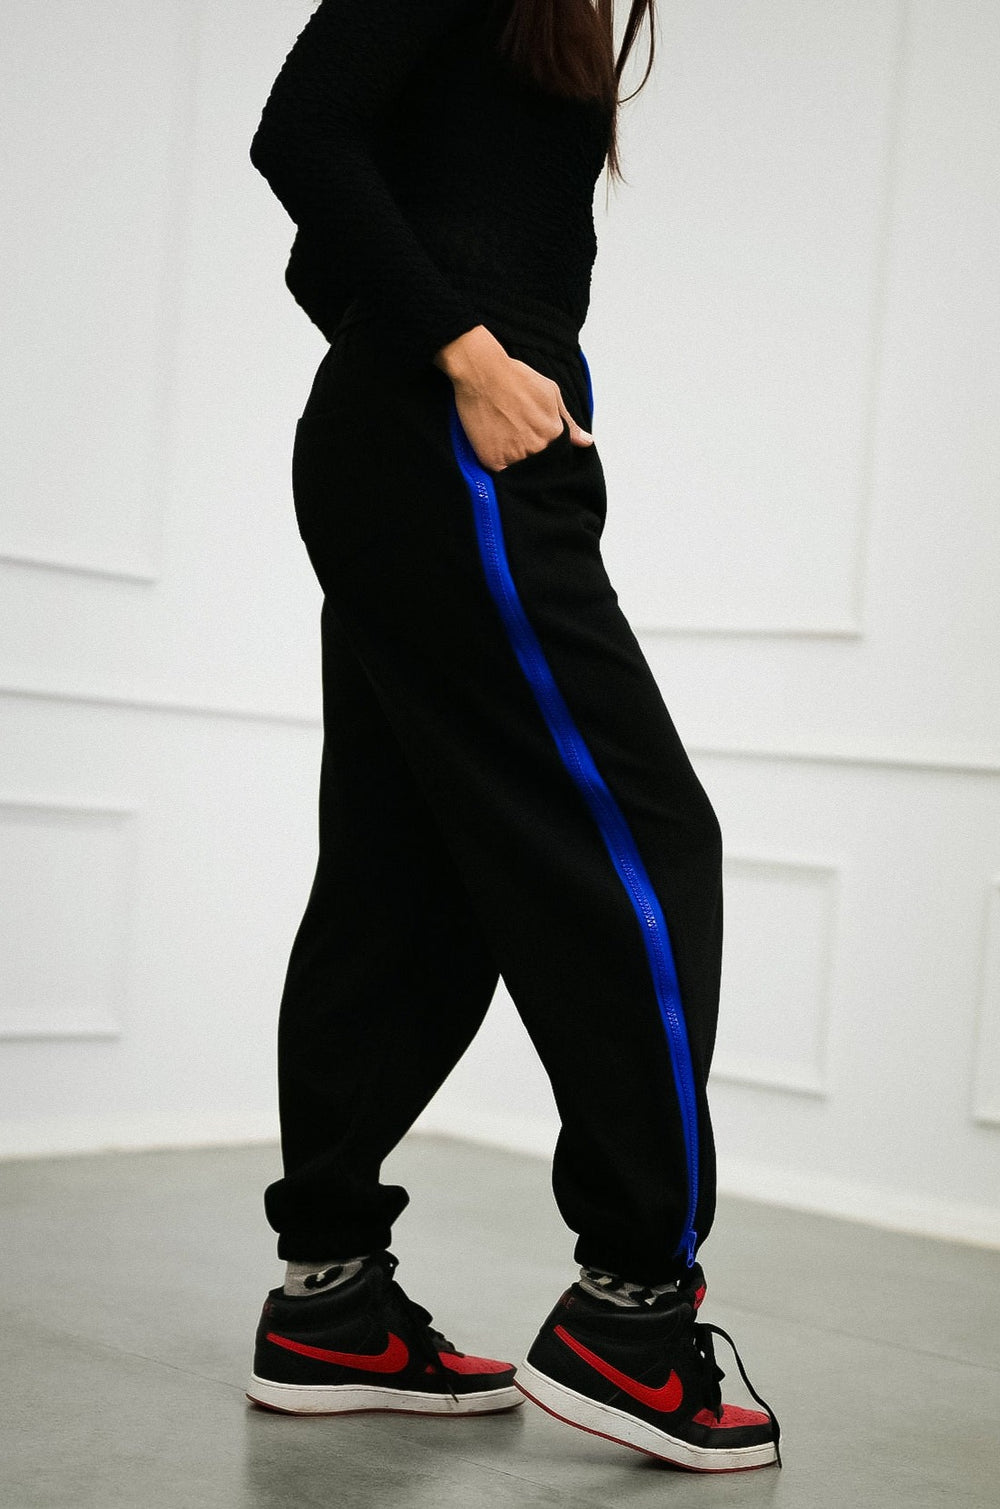 Stylish joggers with one side green functional zipper